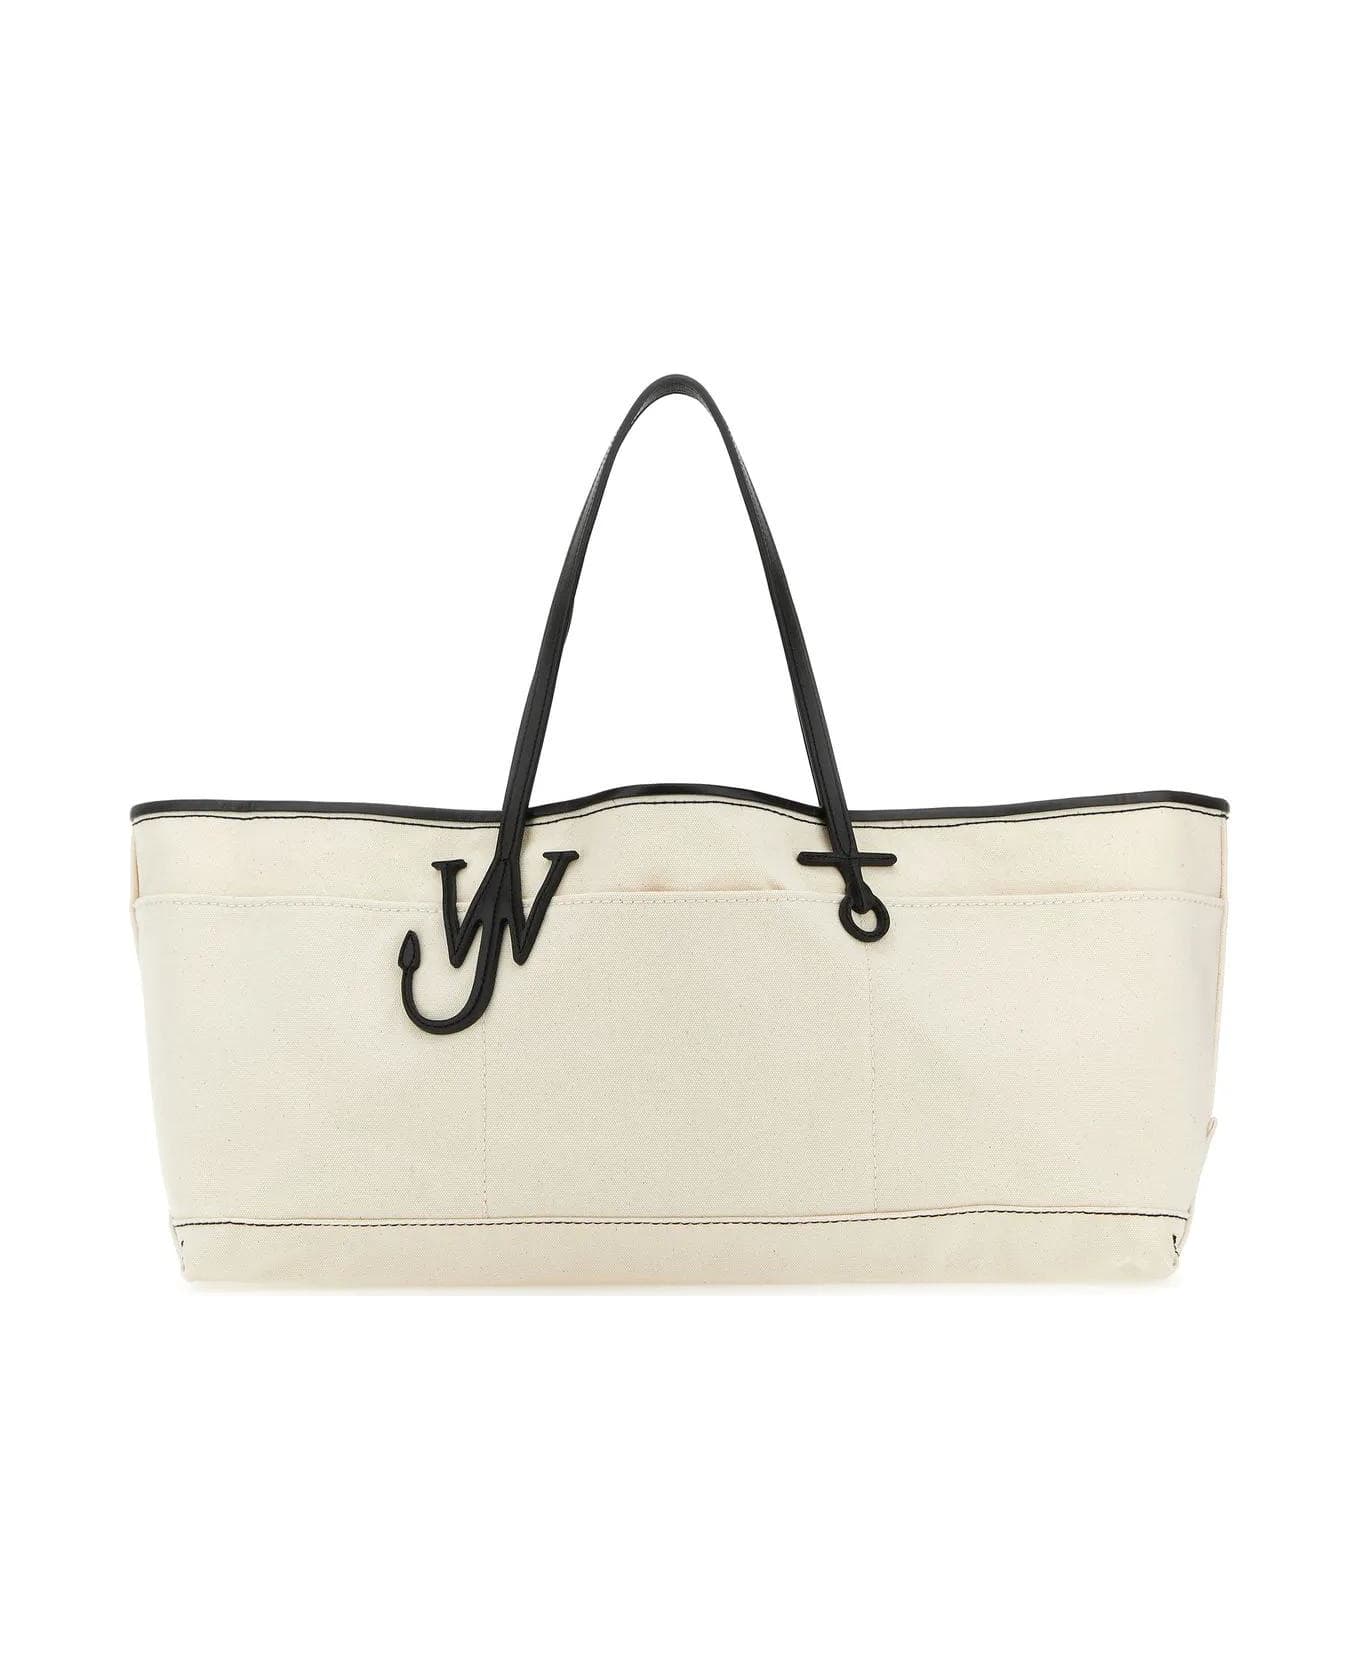 J.W. Anderson Ivory Canvas Anchor Shopping Bag - WHITE/BLACK